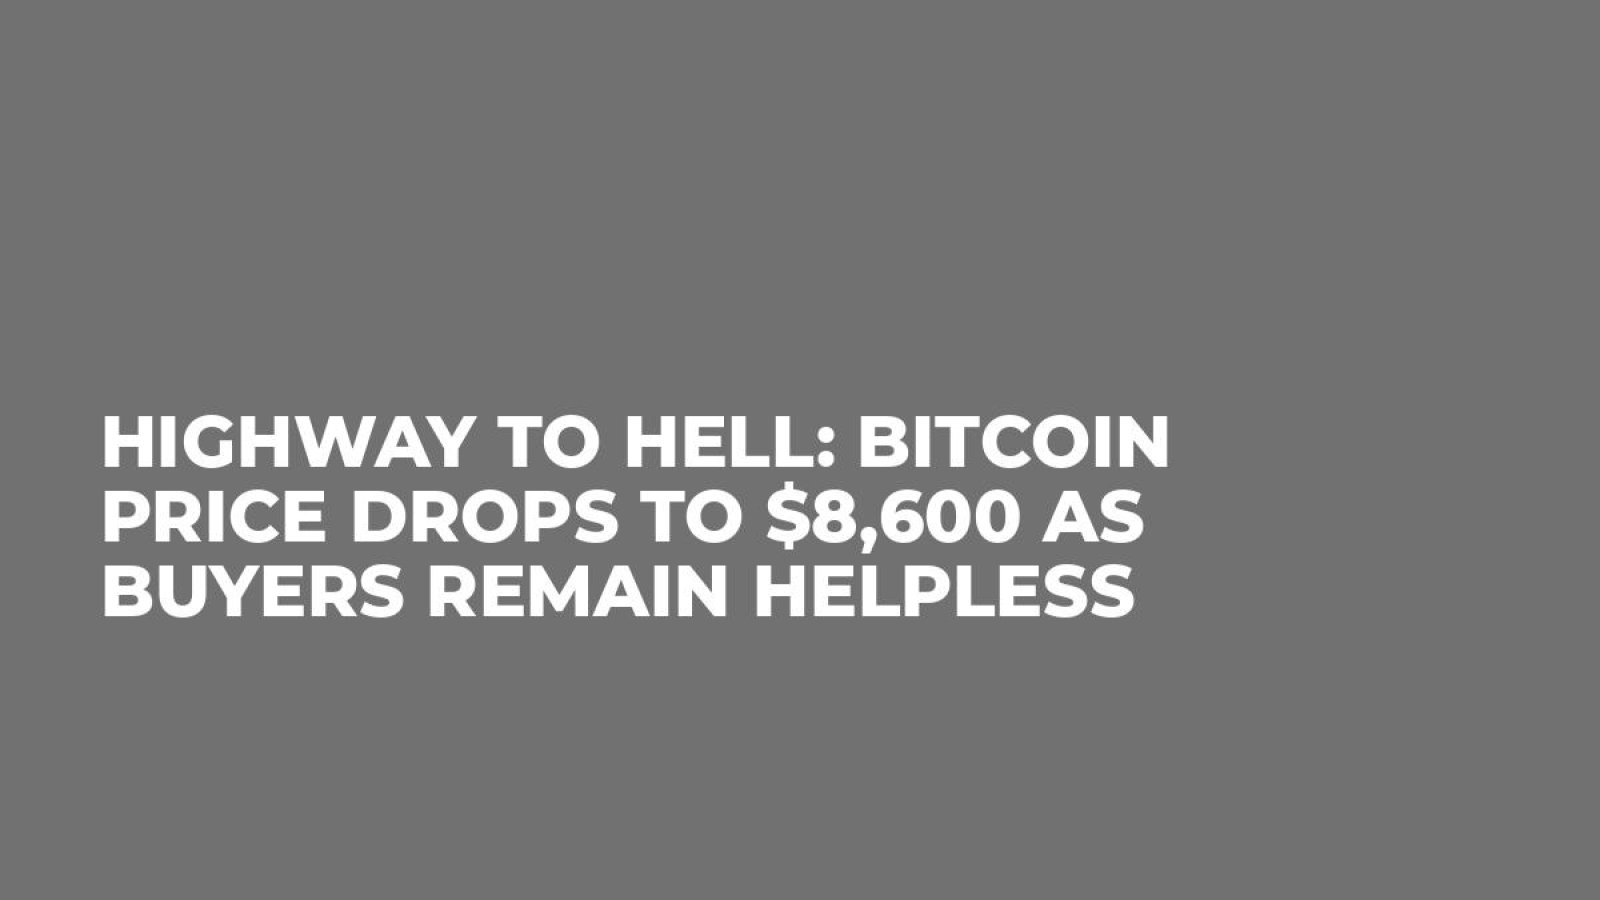 Highway to Hell: Bitcoin Price Drops to $8,600 As Buyers Remain Helpless